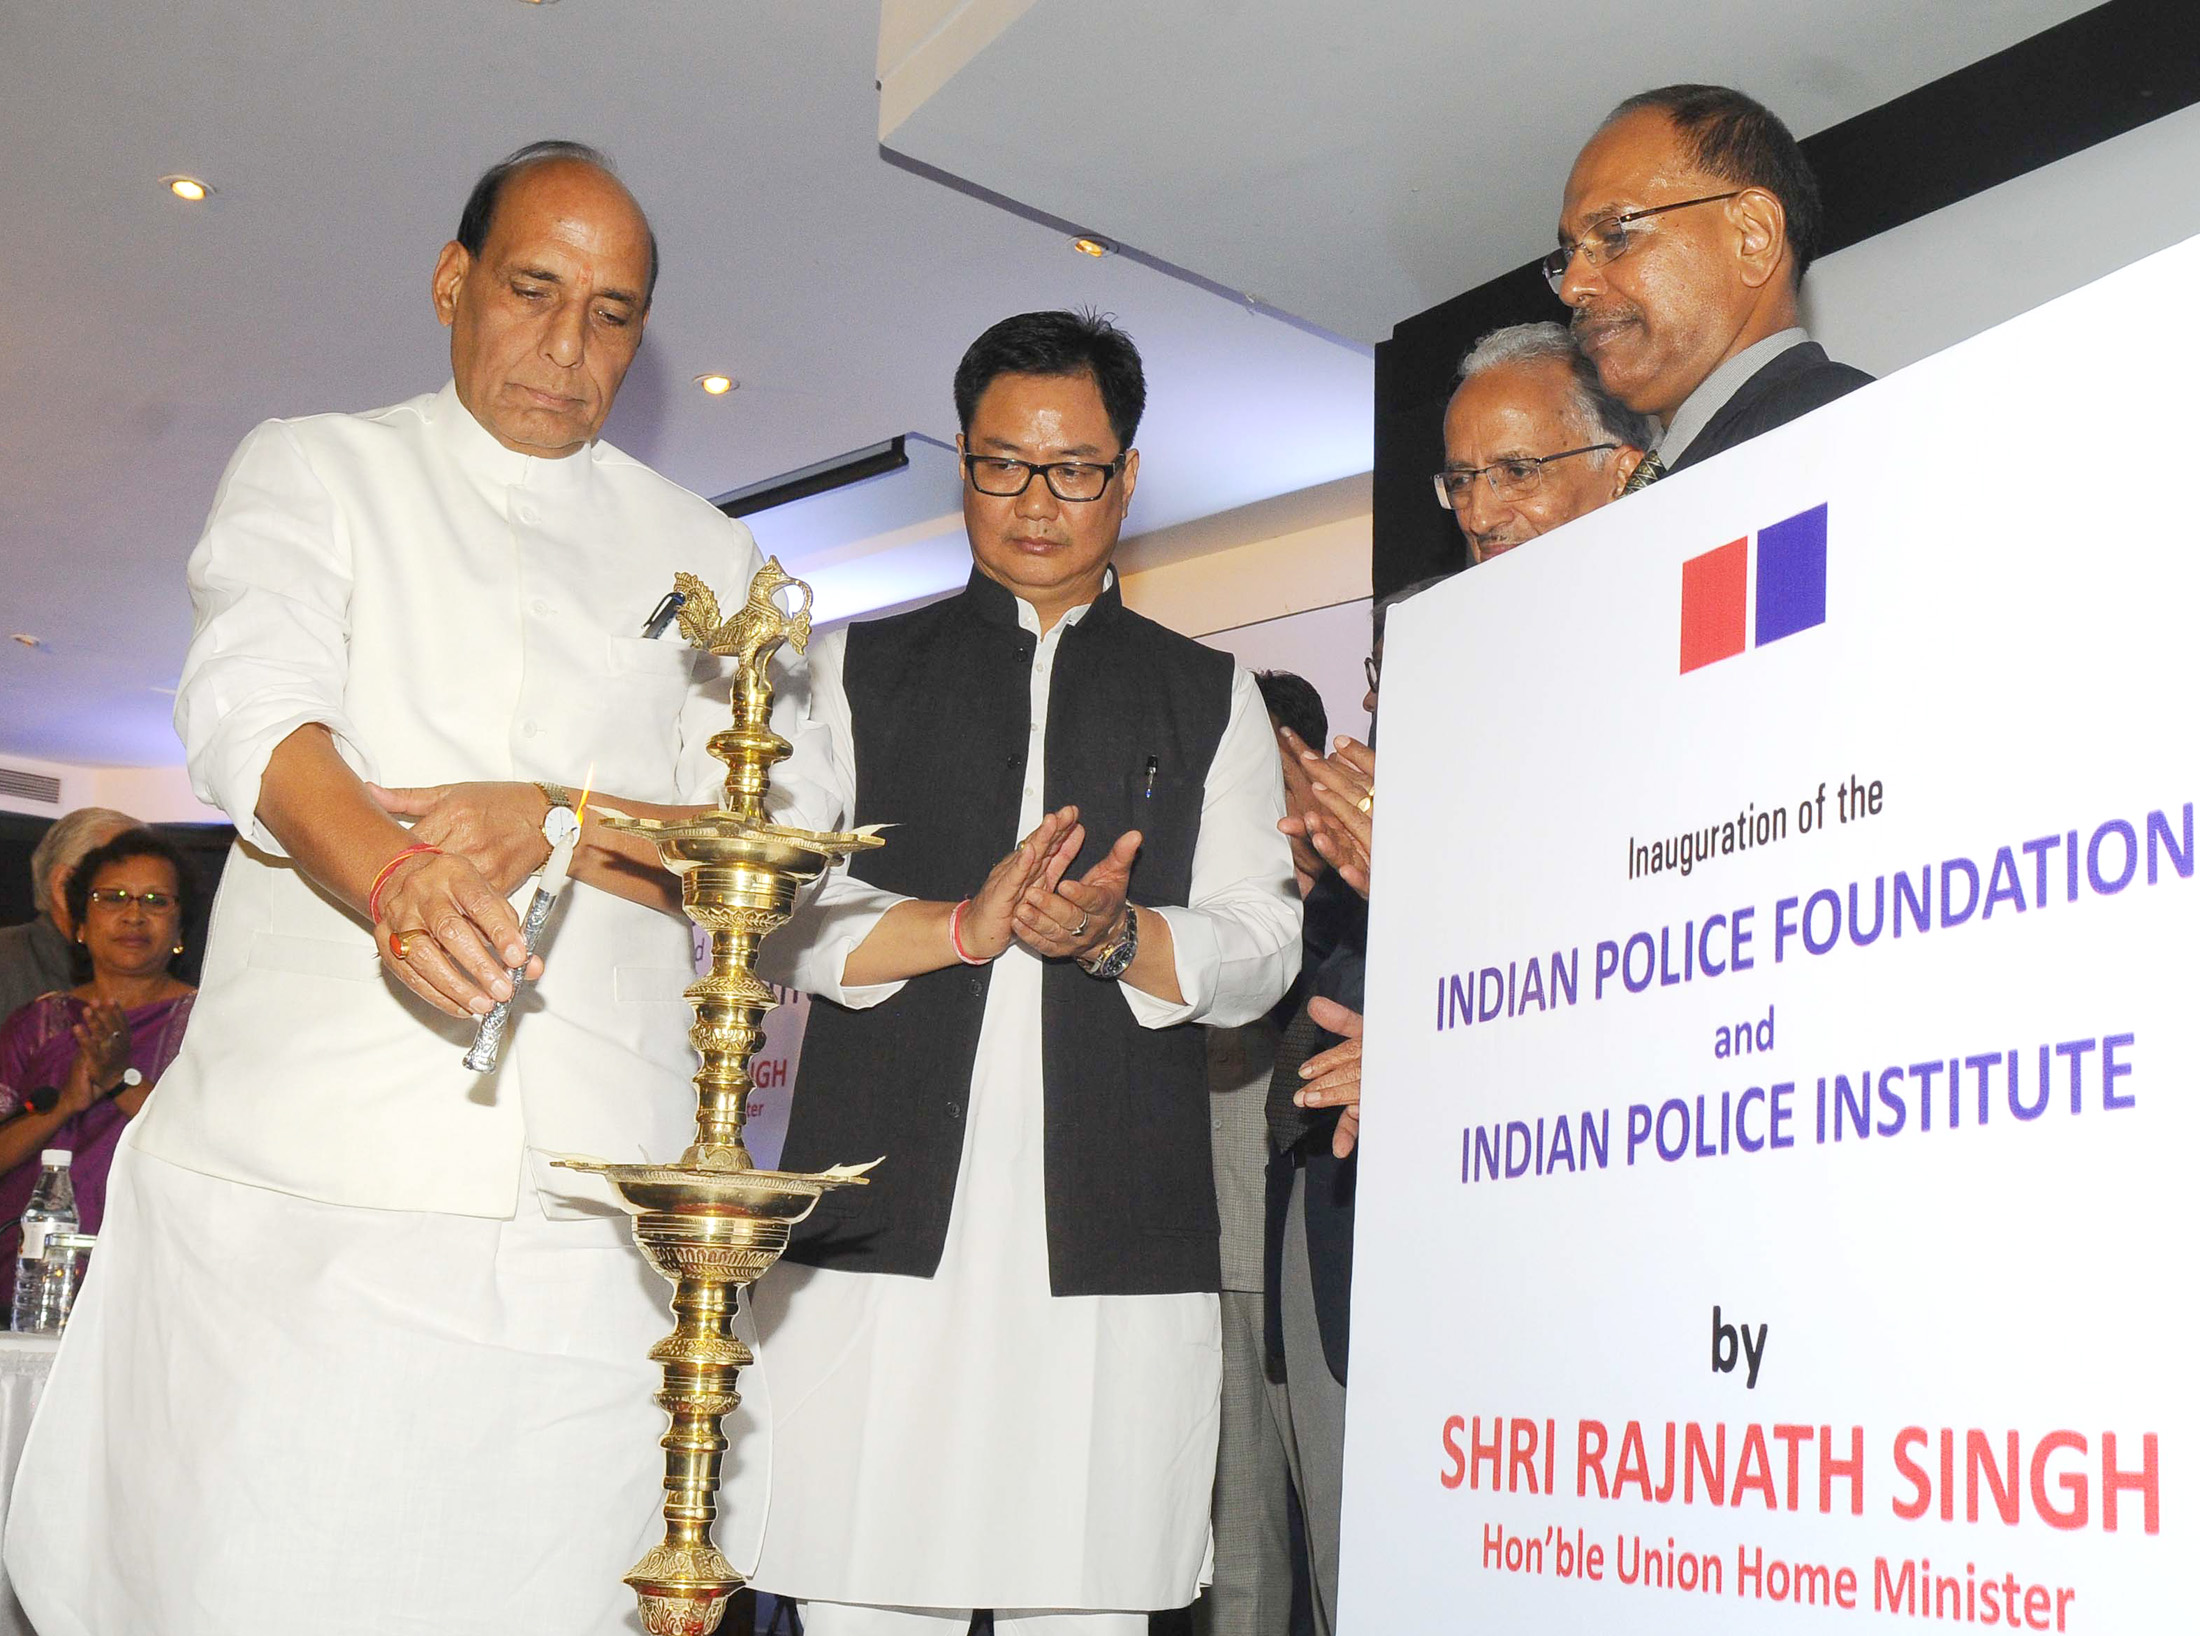 The Union Home Minister, Shri Rajnath Singh lighting the lamp to inaugurate the Indian Police Foundation and the Indian Police Institute, in New Delhi on October 21, 2015. 	The Minister of State for Home Affairs, Shri Kiren Rijiju and other dignitaries are also seen.